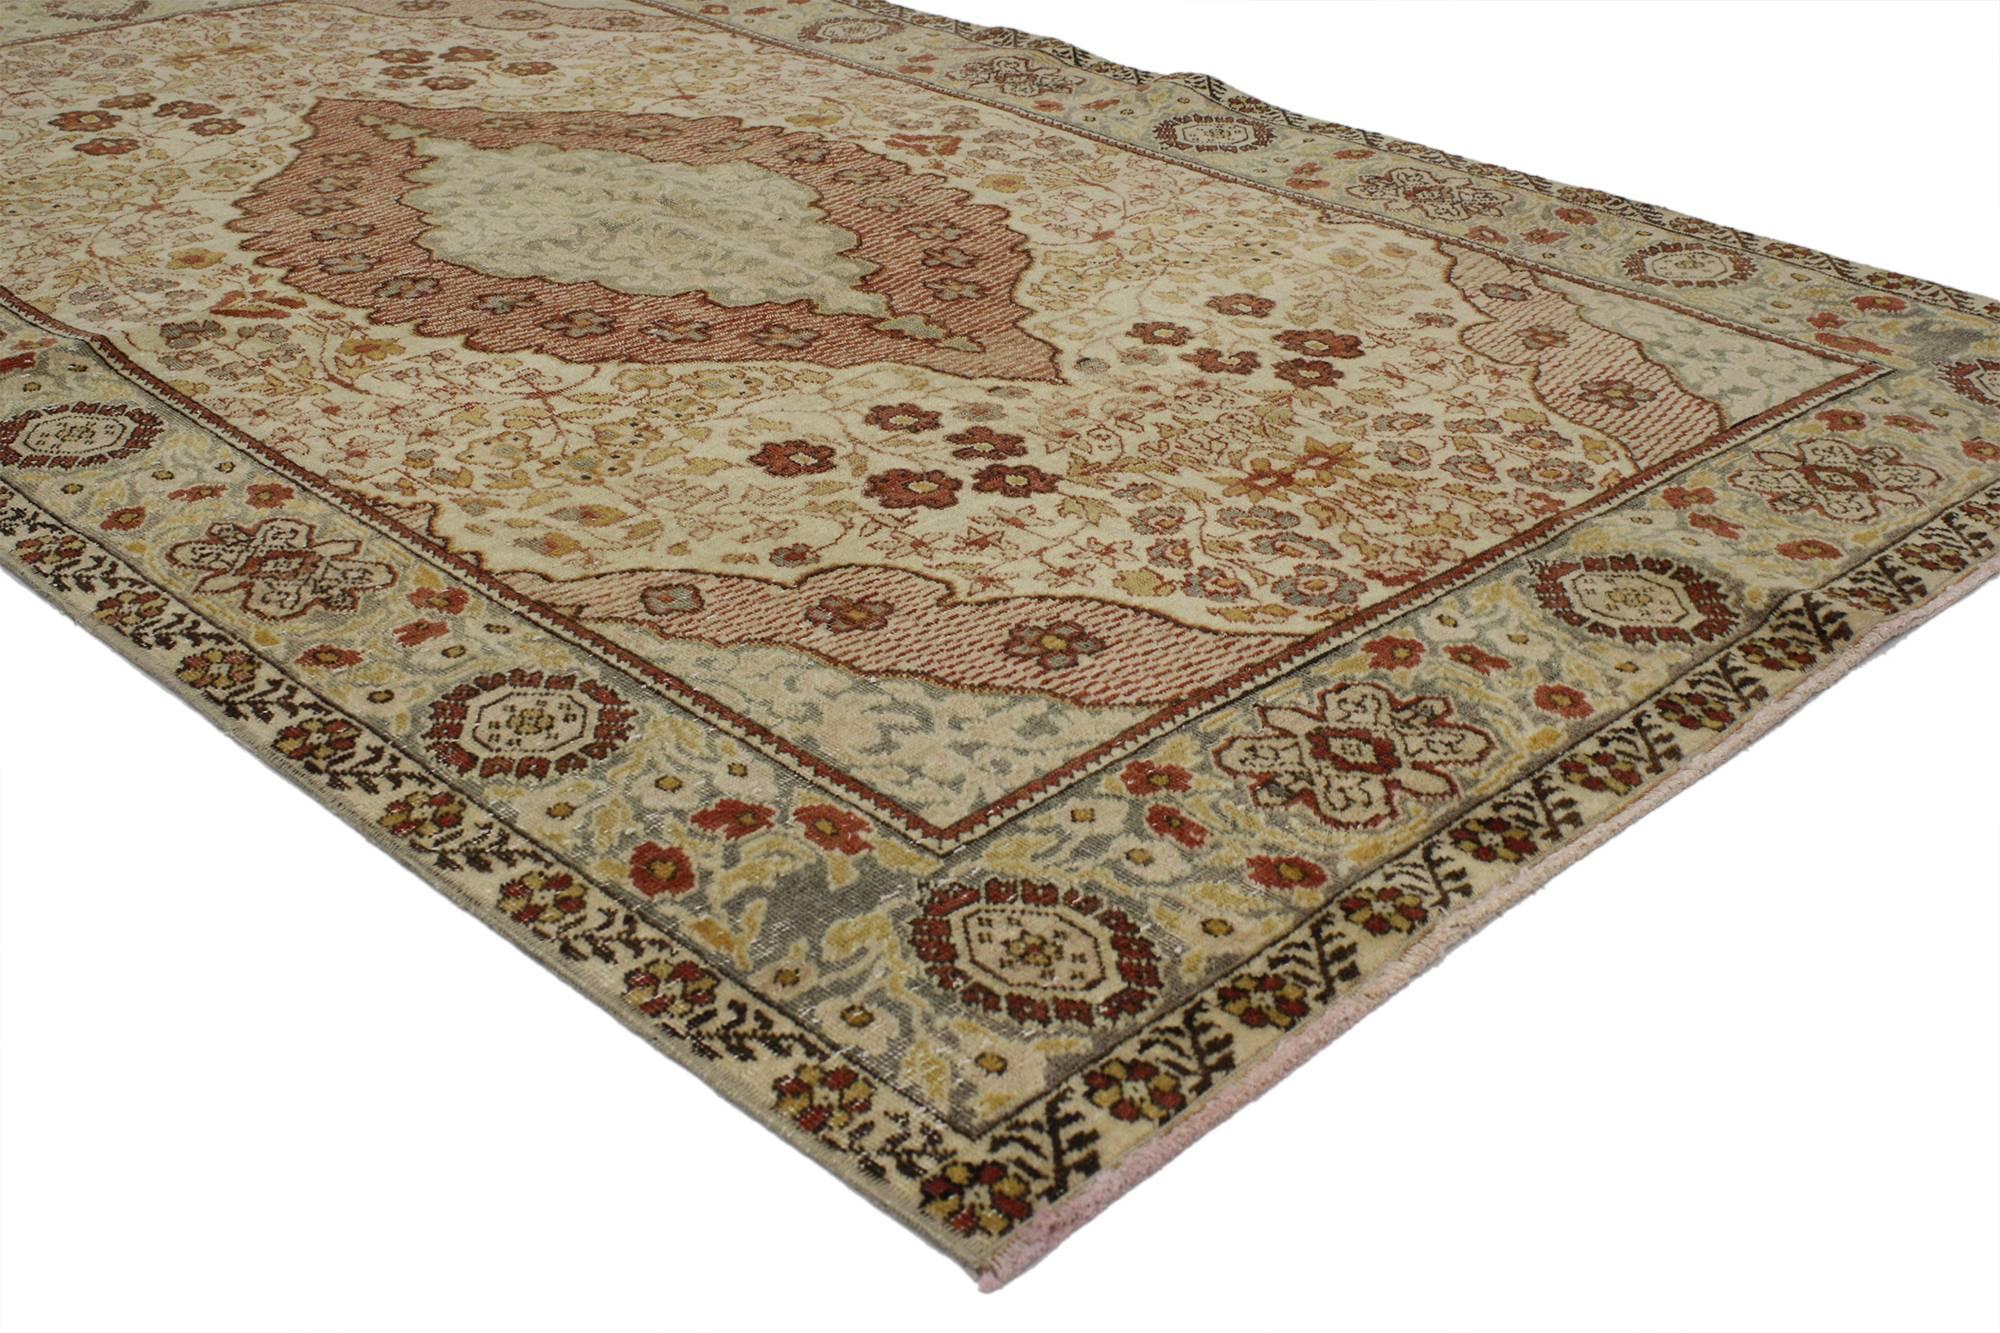 52072, vintage Turkish Oushak accent rug with rustic cottage Arts & Crafts style, entry or foyer rug. With architectural elements of curved forms and decorative detailing, this hand knotted wool vintage Turkish Oushak rug features a cusped center